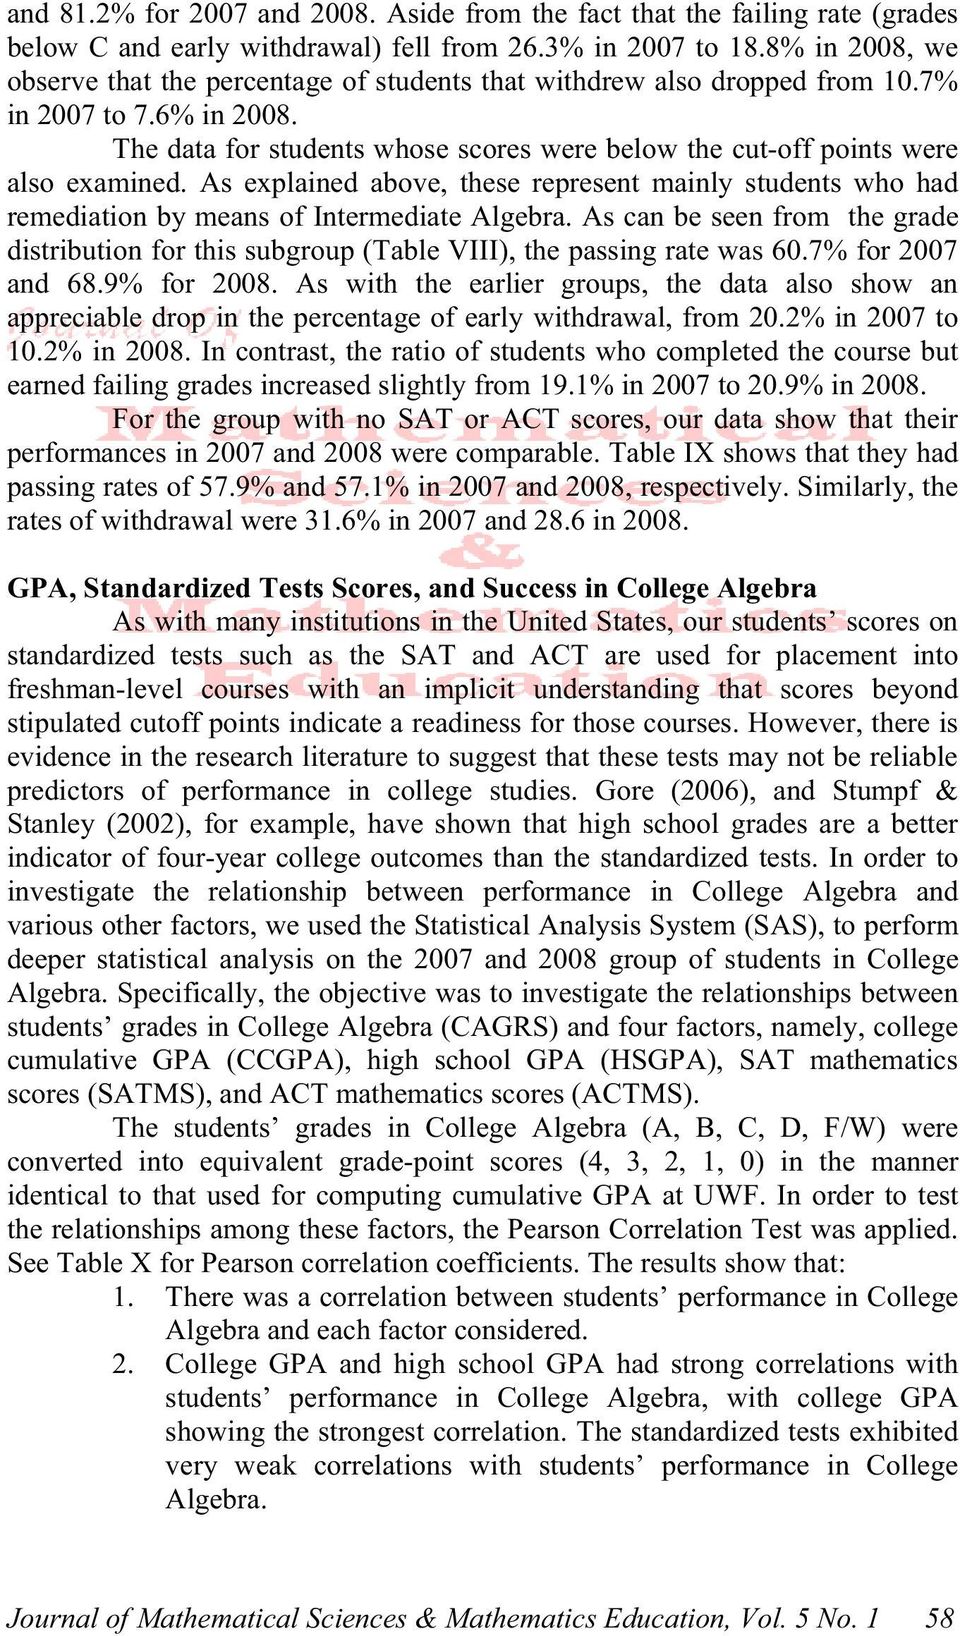 The data for students whose scores were below the cut-off points were also examined. As explained above, these represent mainly students who had remediation by means of Intermediate Algebra.